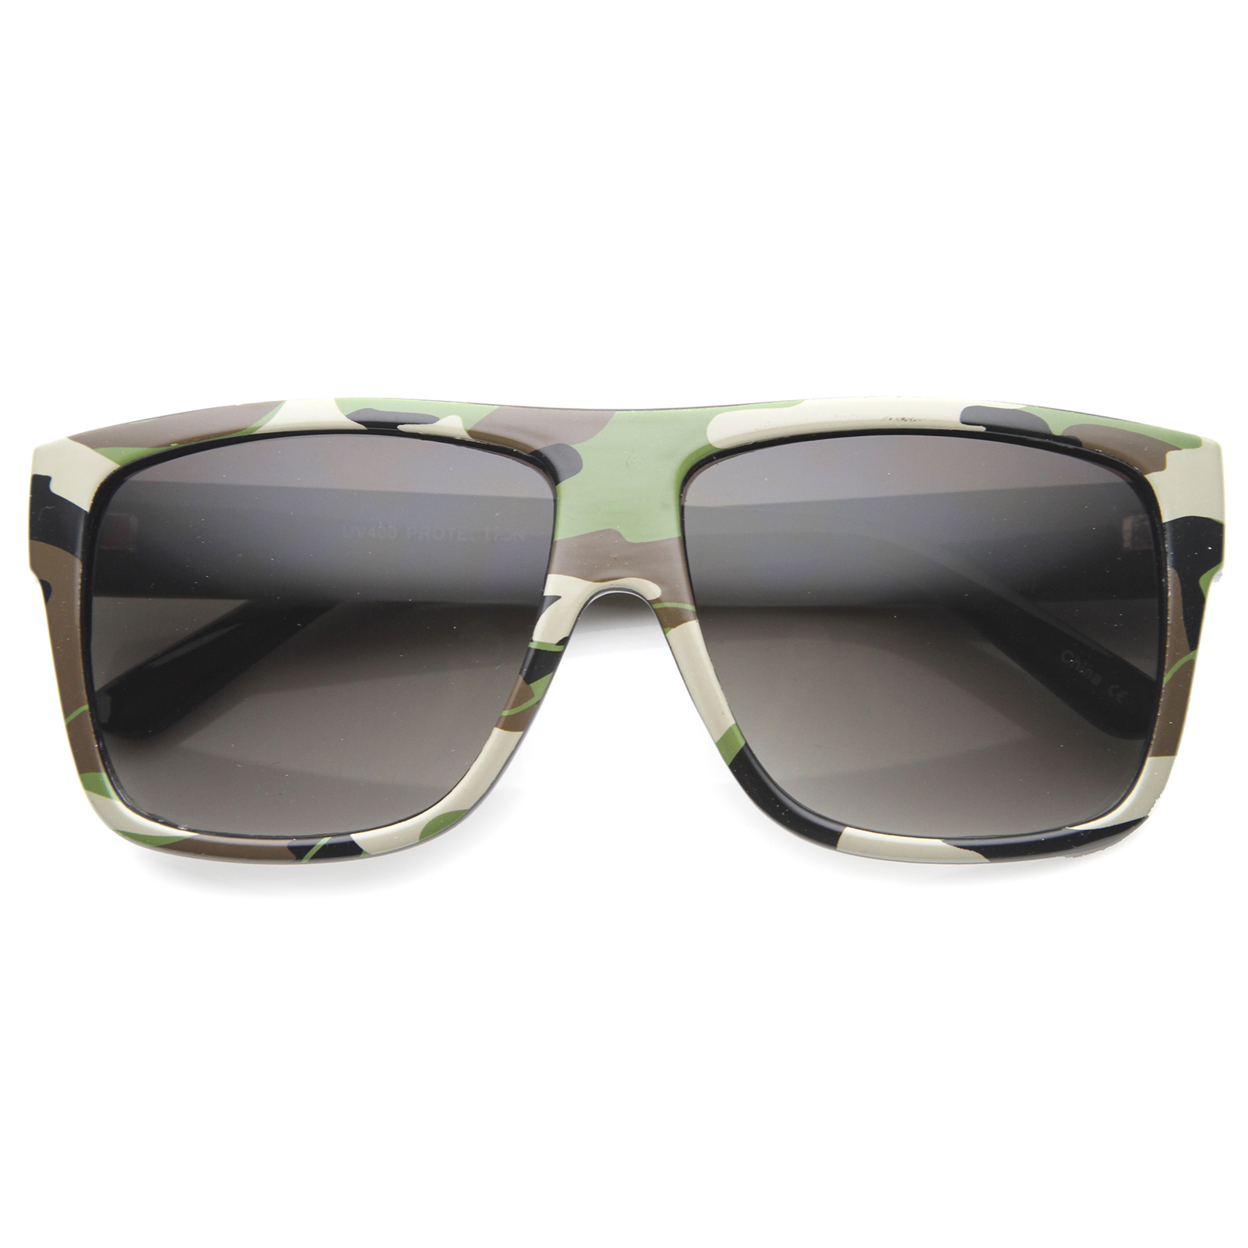 Unisex Rectangular Sunglasses With UV400 Protected Composite Lens 9926 - Neon Green Camouflage / Lavender